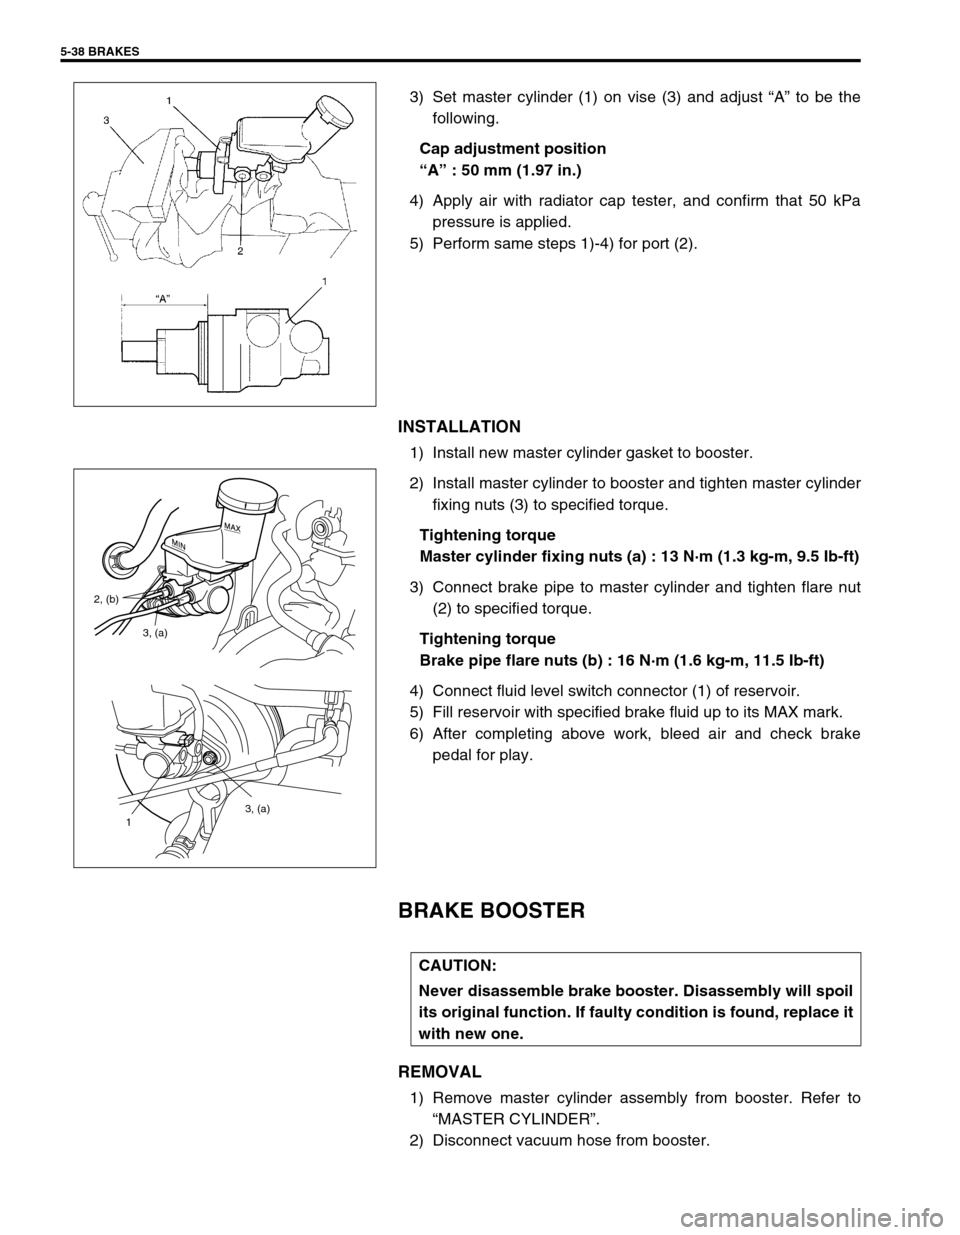 SUZUKI SWIFT 2000 1.G RG413 Service Owners Manual 5-38 BRAKES
3) Set master cylinder (1) on vise (3) and adjust “A” to be the
following.
Cap adjustment position
“A” : 50 mm (1.97 in.)
4) Apply air with radiator cap tester, and confirm that 50